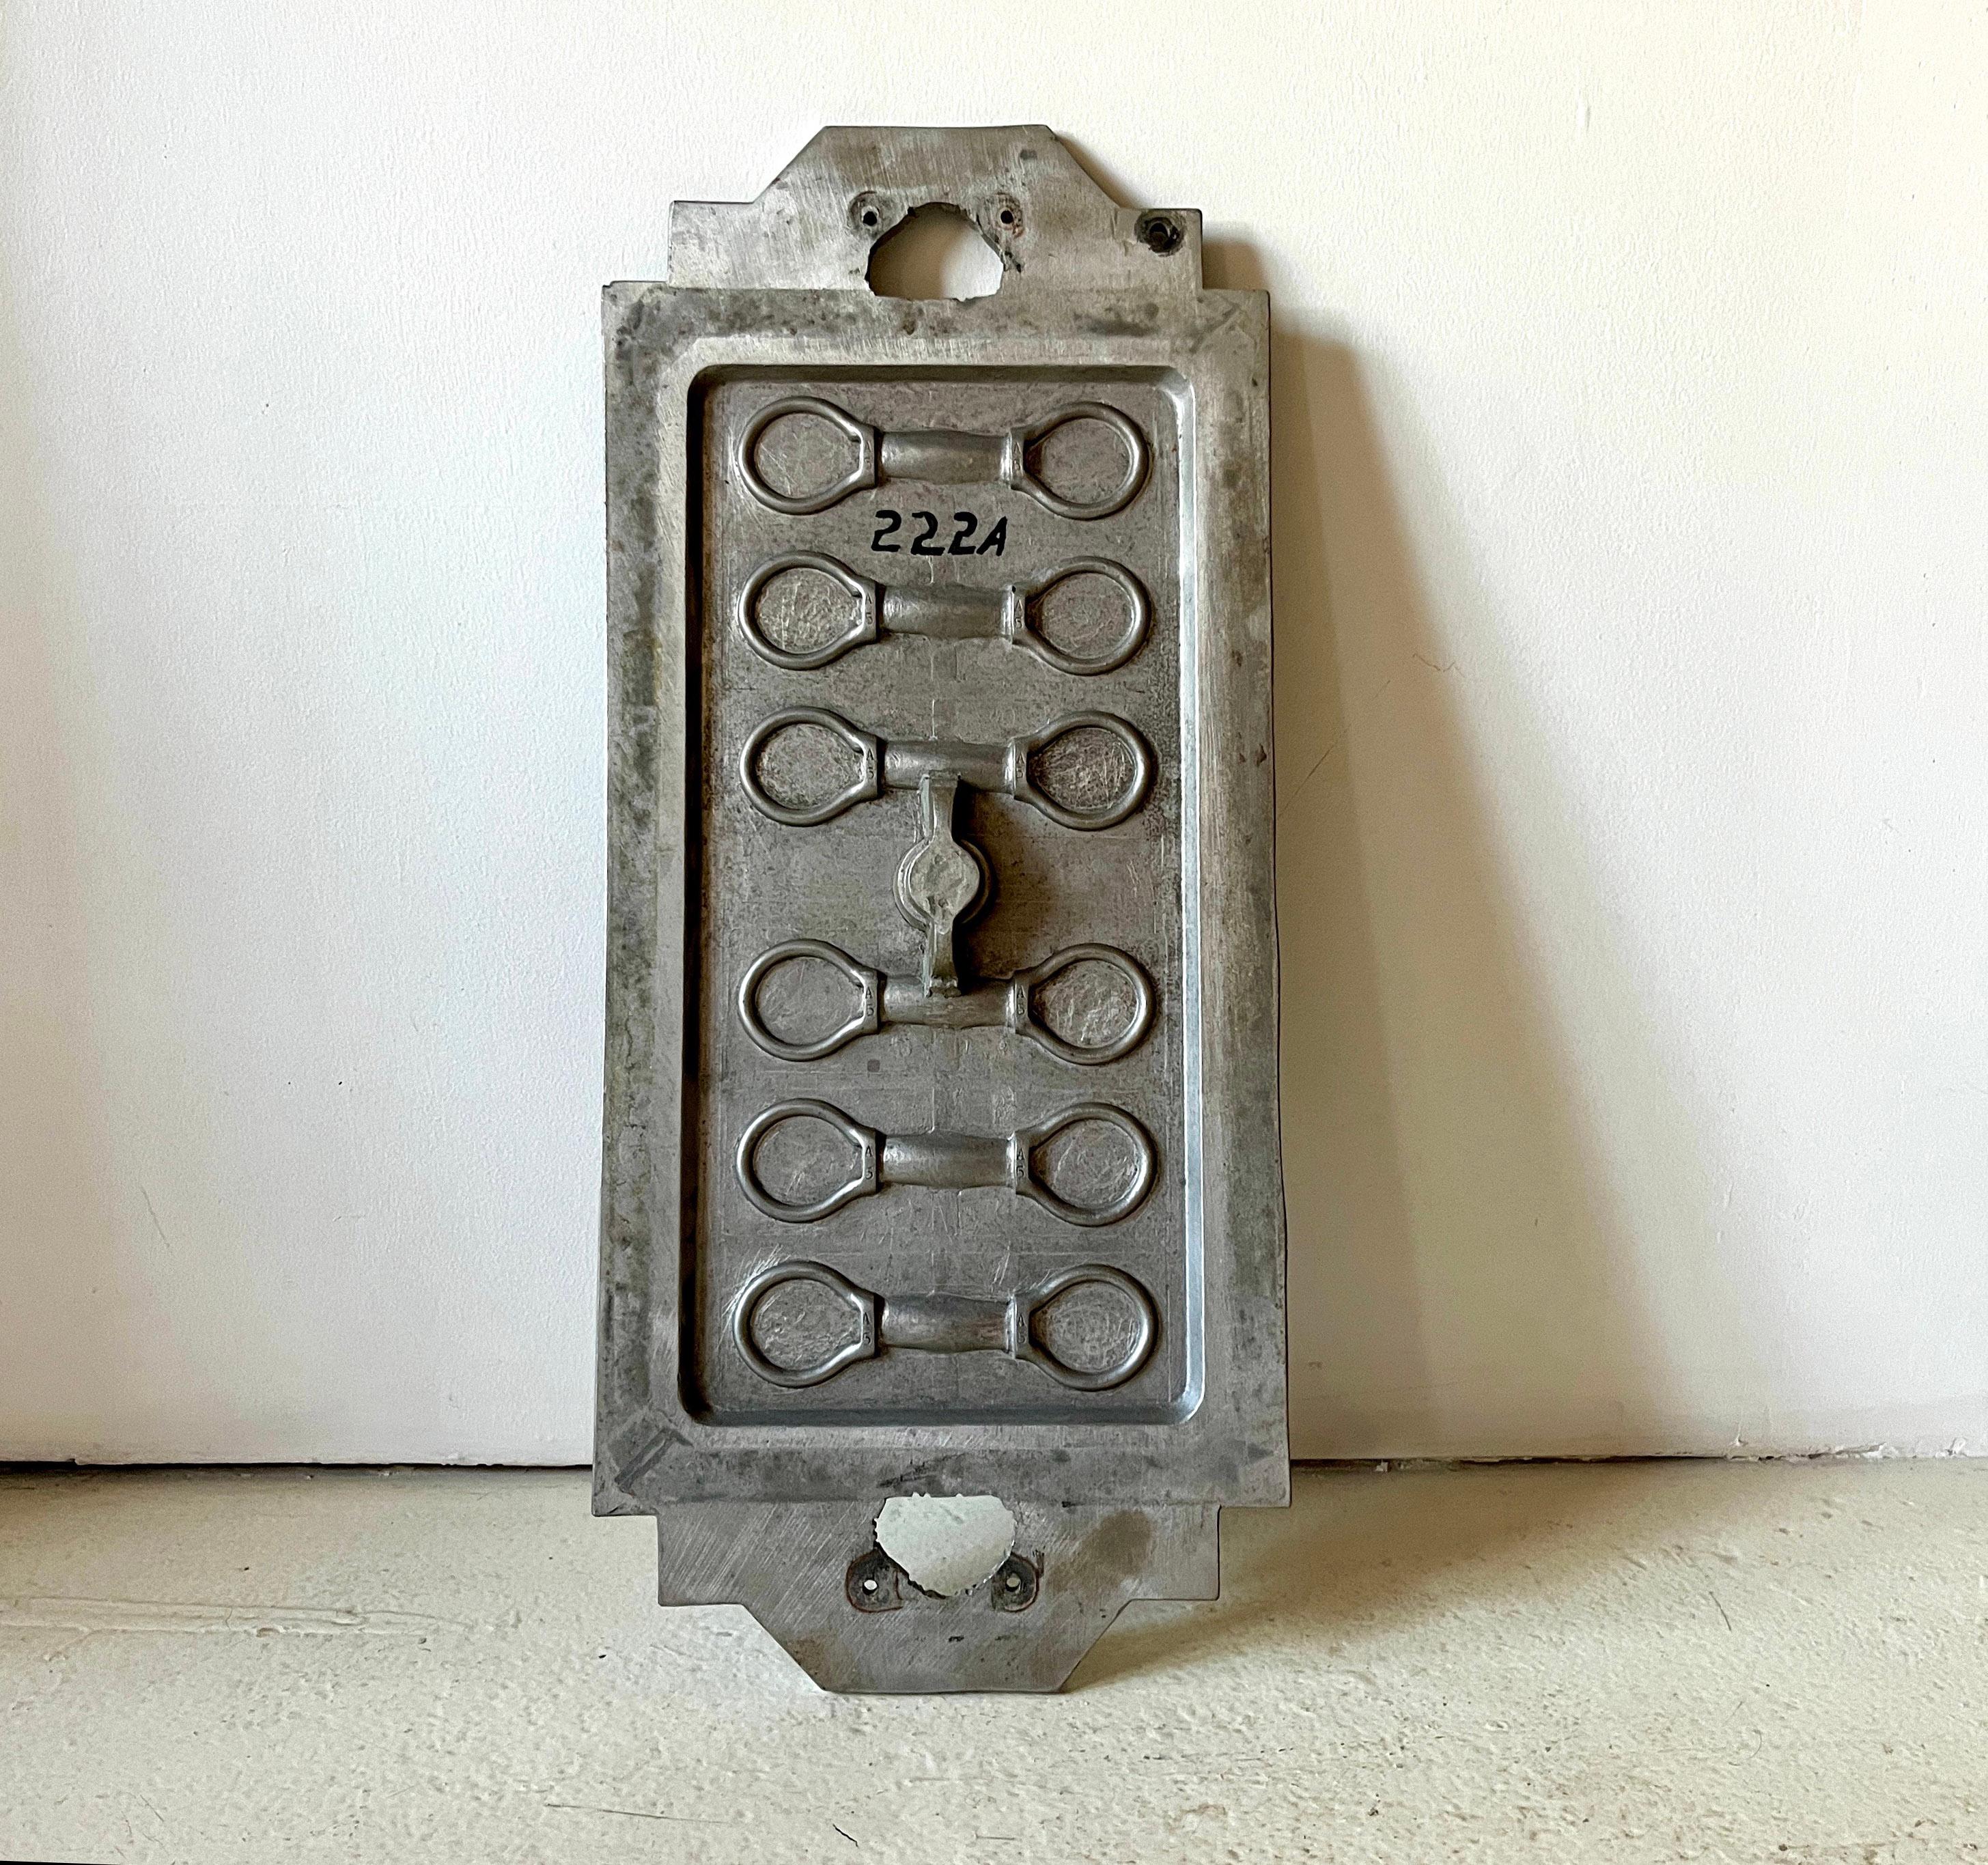 This classic American Industrial cast metal foundry pattern mold makes a great conversation piece. Large size with intricate pattern for perhaps some kind of horse saddle part? Great patina. Engraved/stamped with 